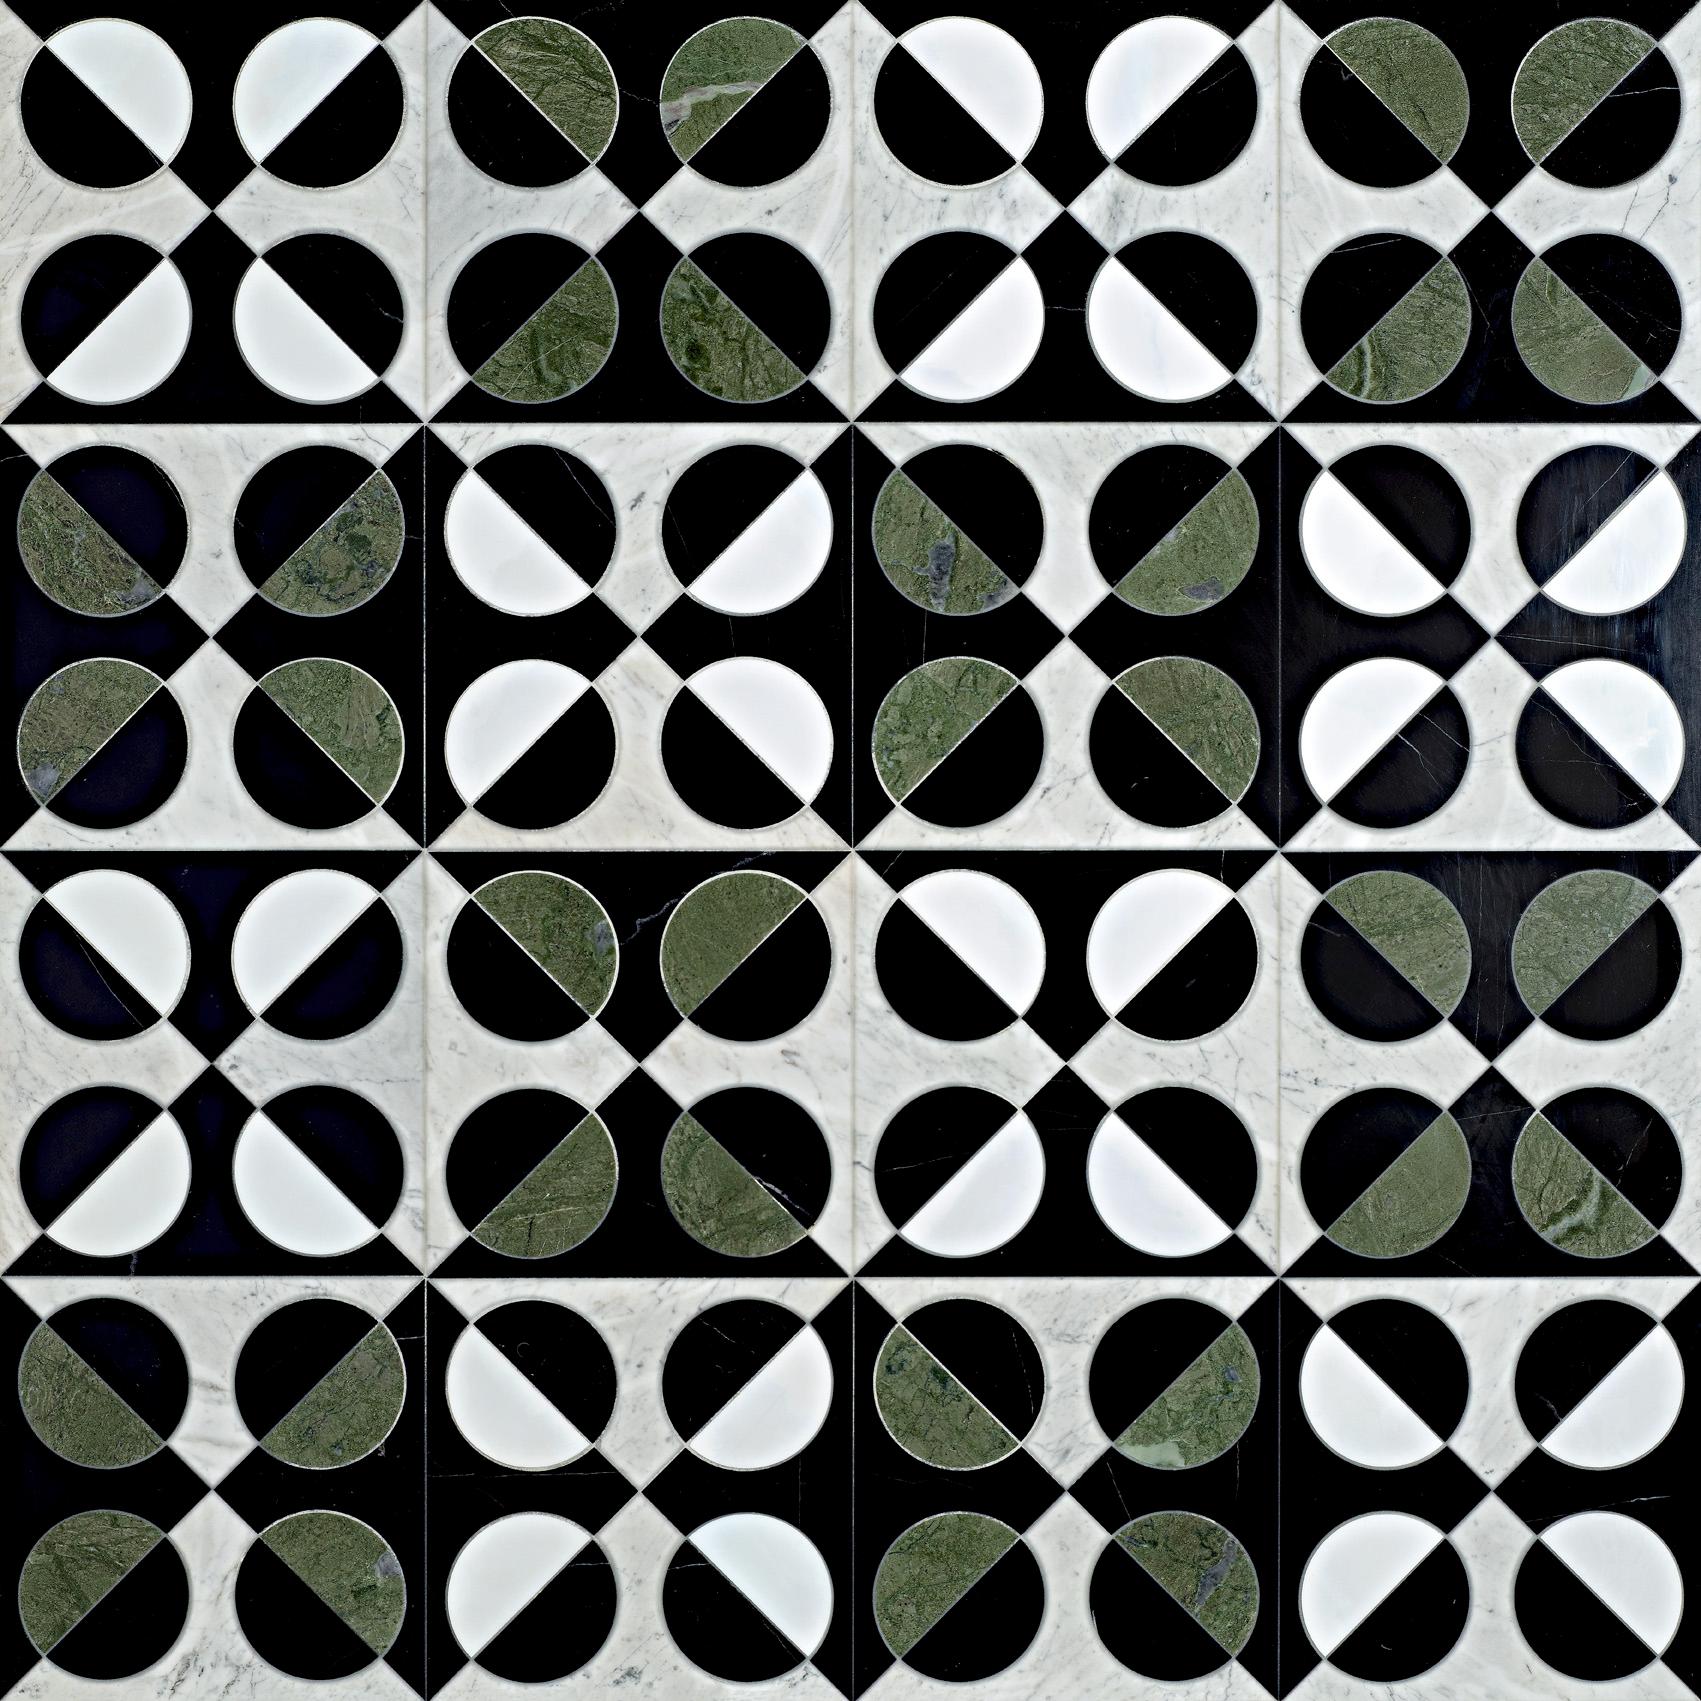 Waterjet marble patterns

Tolox Green
Marble: Bianco Americo, Black, Verde Luna
Glass Mosaic : White Iridescent
Price for square metrer € 2.820
  